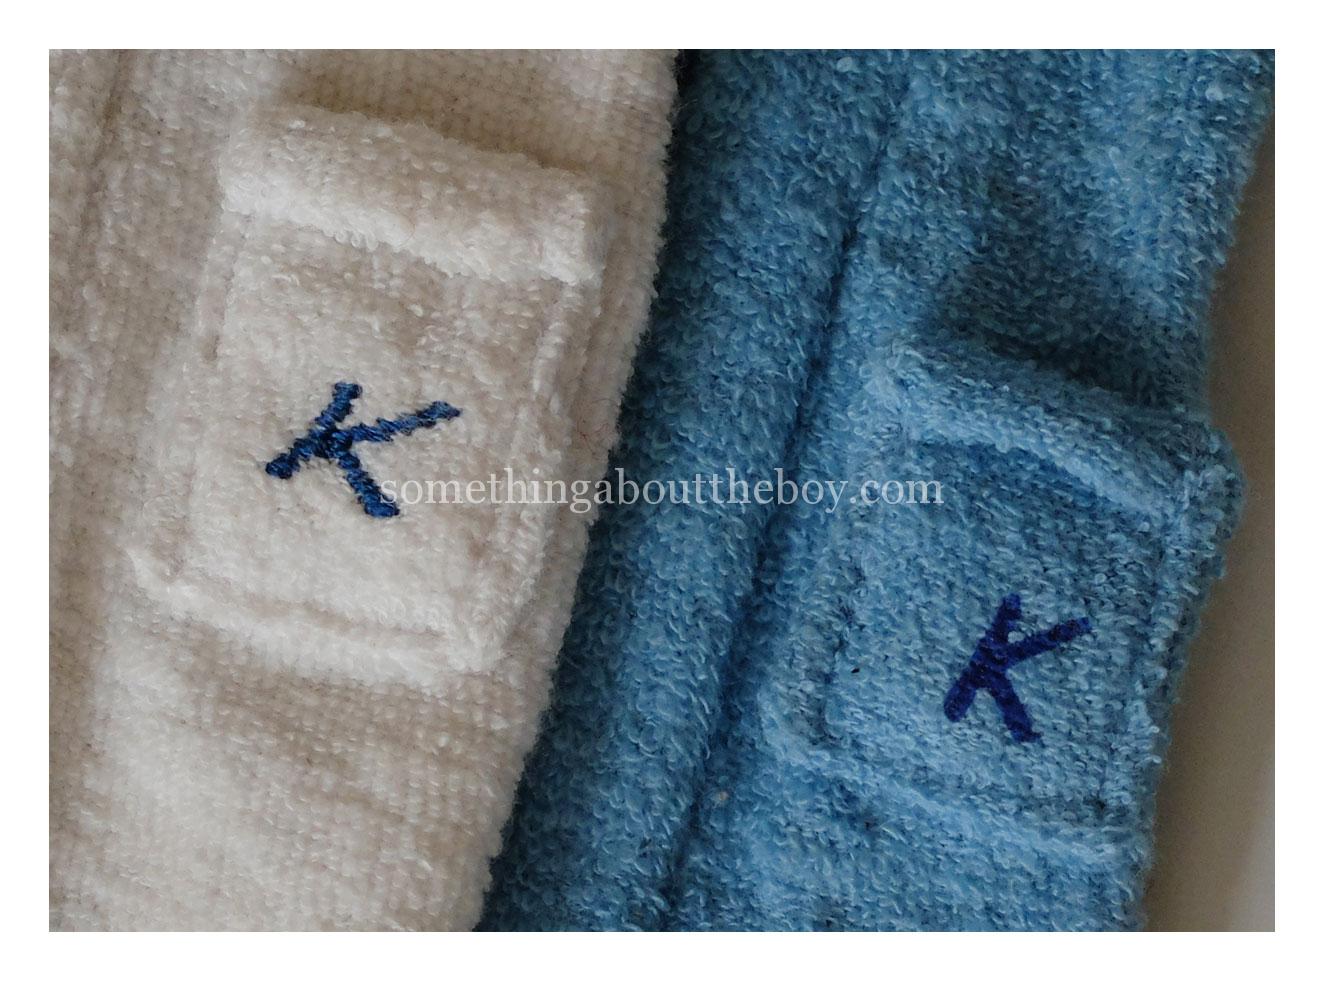 #784 Terry Togs white and deeper blue robes, showing 'K' stitched on (left) and stamped on (right)